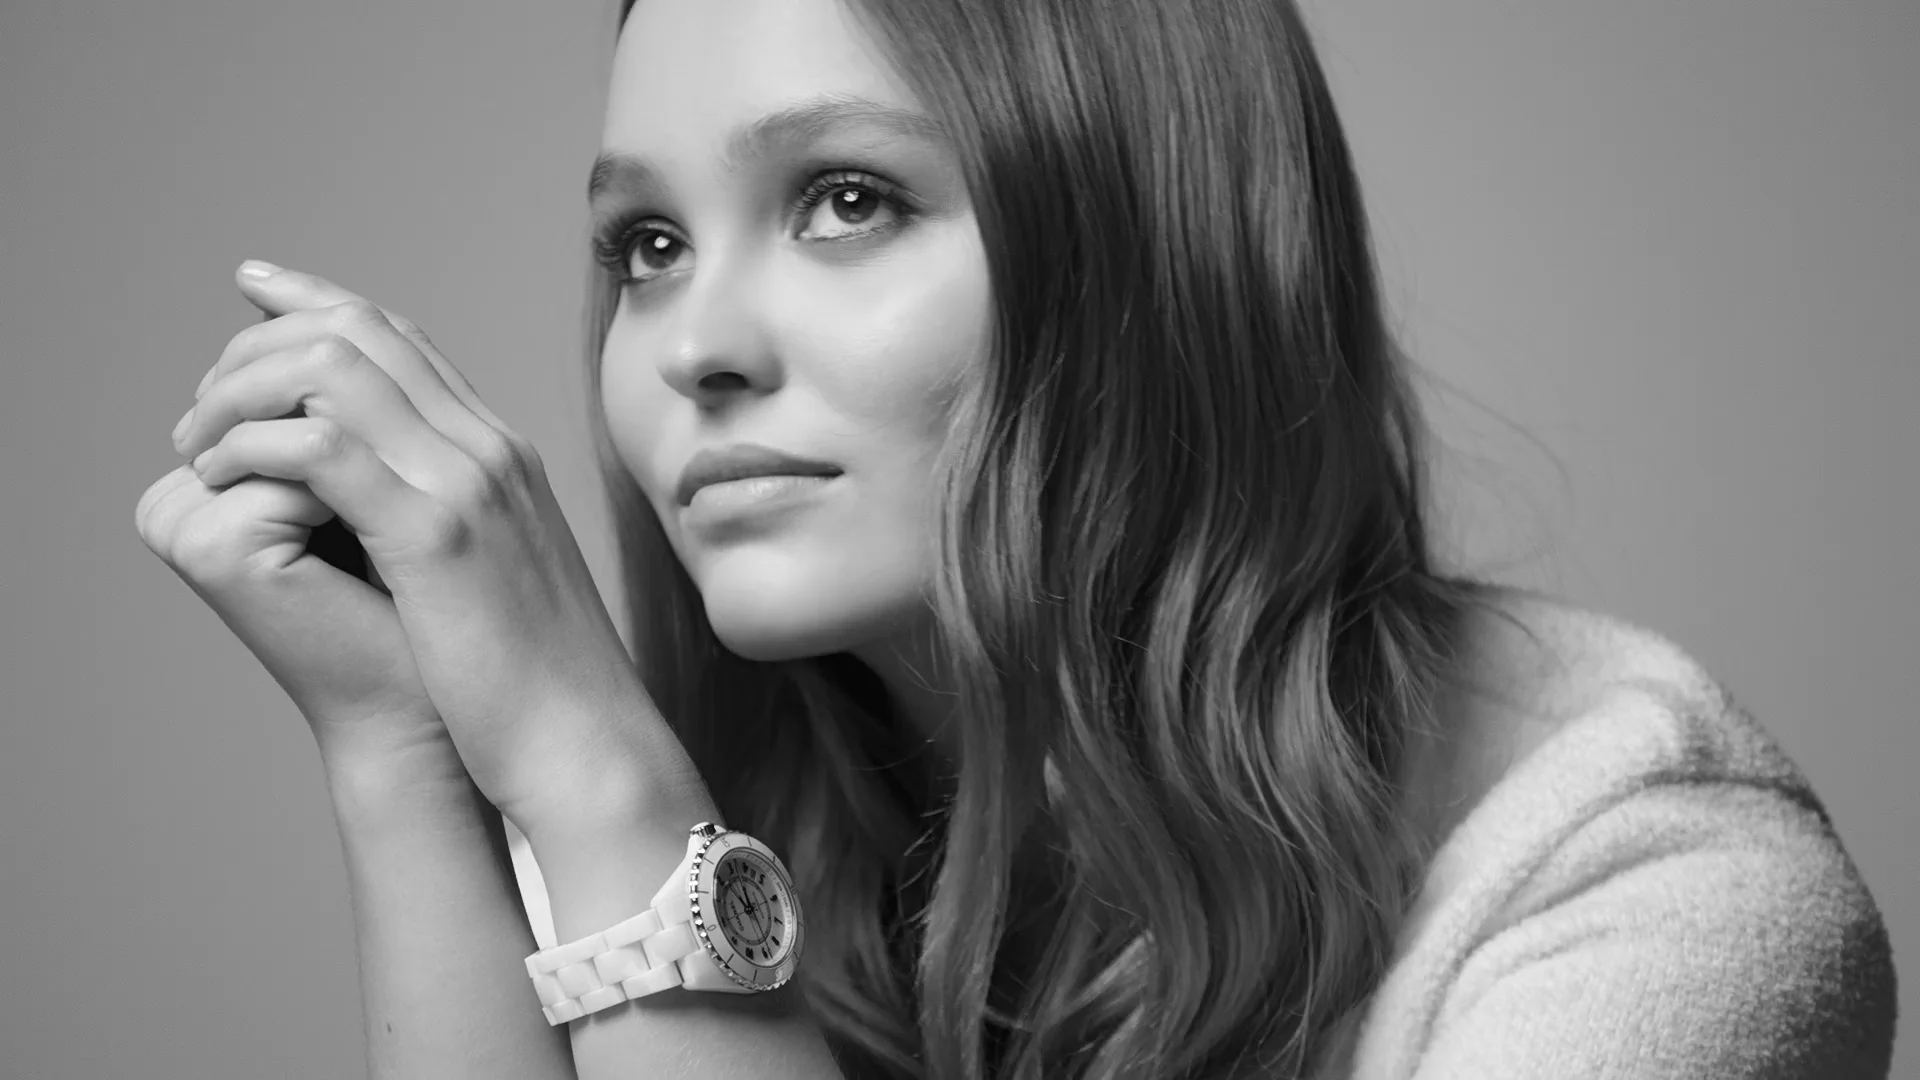 THE NEW J12. IT'S ALL ABOUT SECONDS - LILY ROSE-DEPP on Vimeo